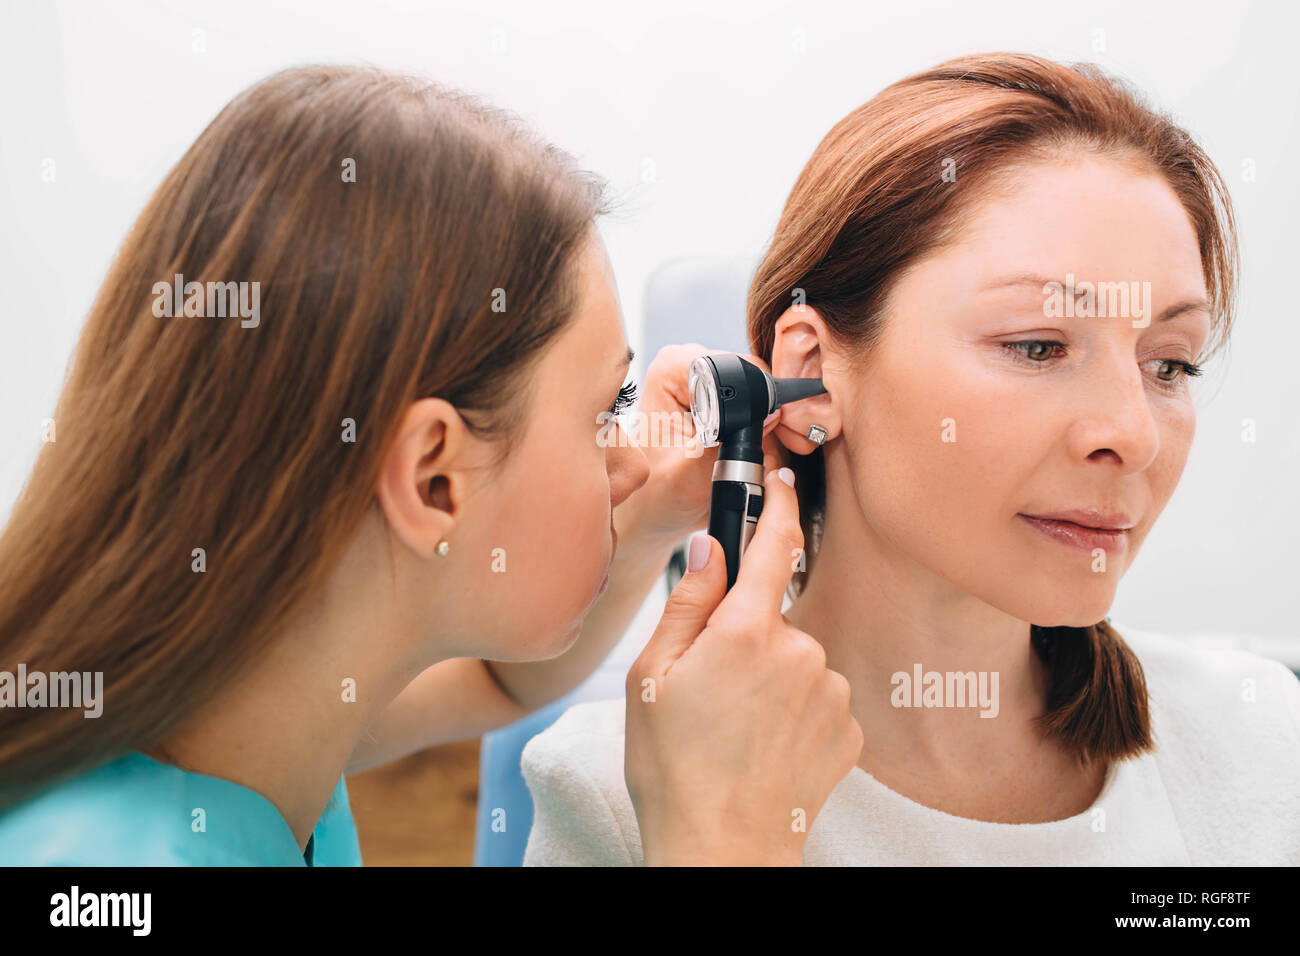 Mature woman getting ear exam at clinic Stock Photo